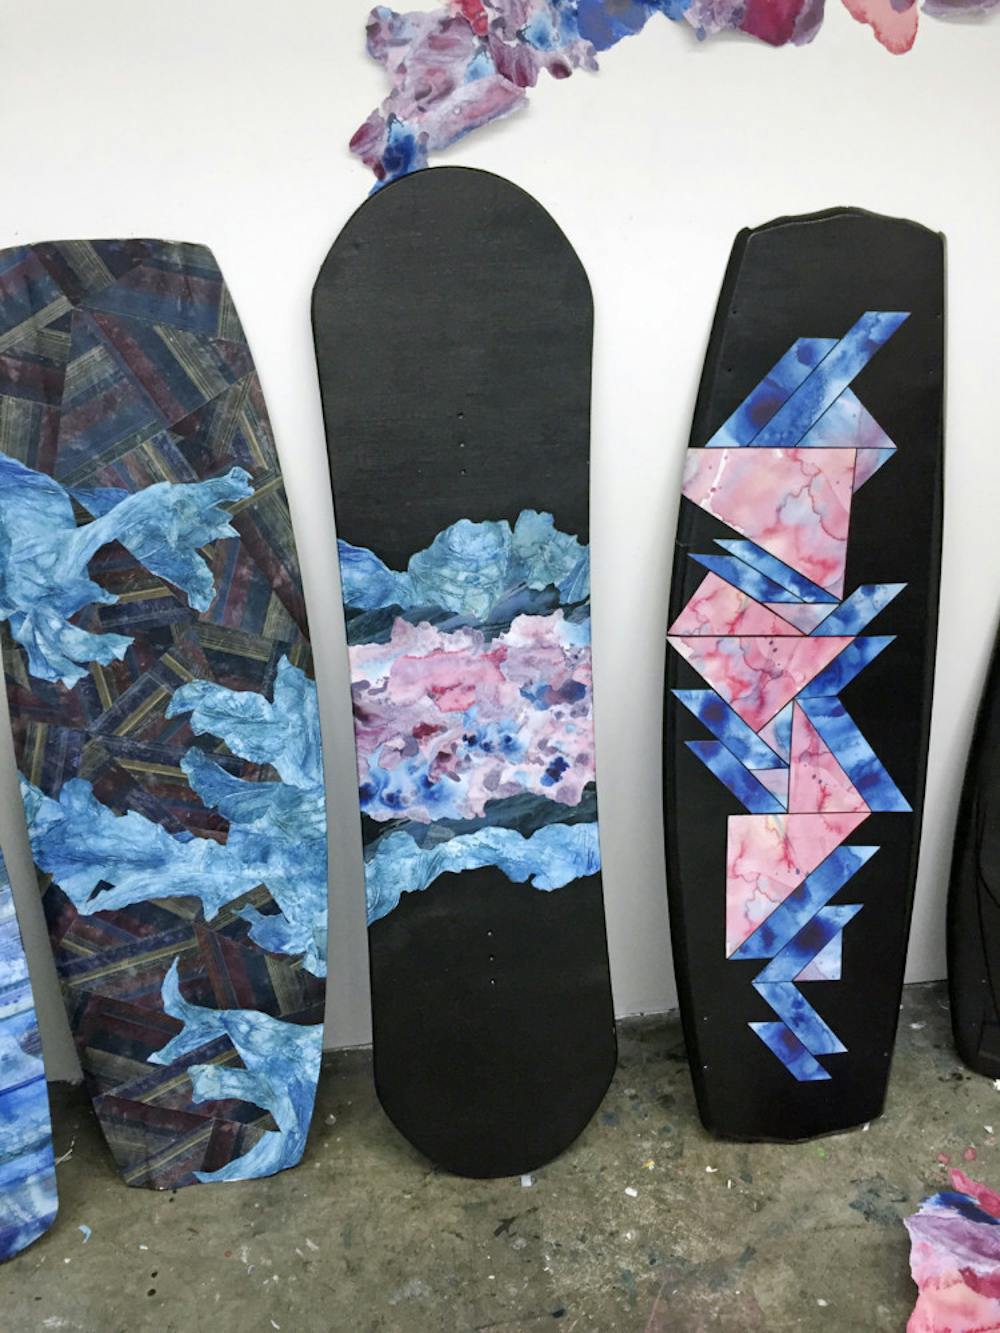 <p class="p1">Pictured are some of the art pieces designed by UF art senior Taylor Adams. Adams uses ink and water to design patterns that she arranges on wakeboards. She will have her first solo exhibition Friday at University Towne Center.</p>